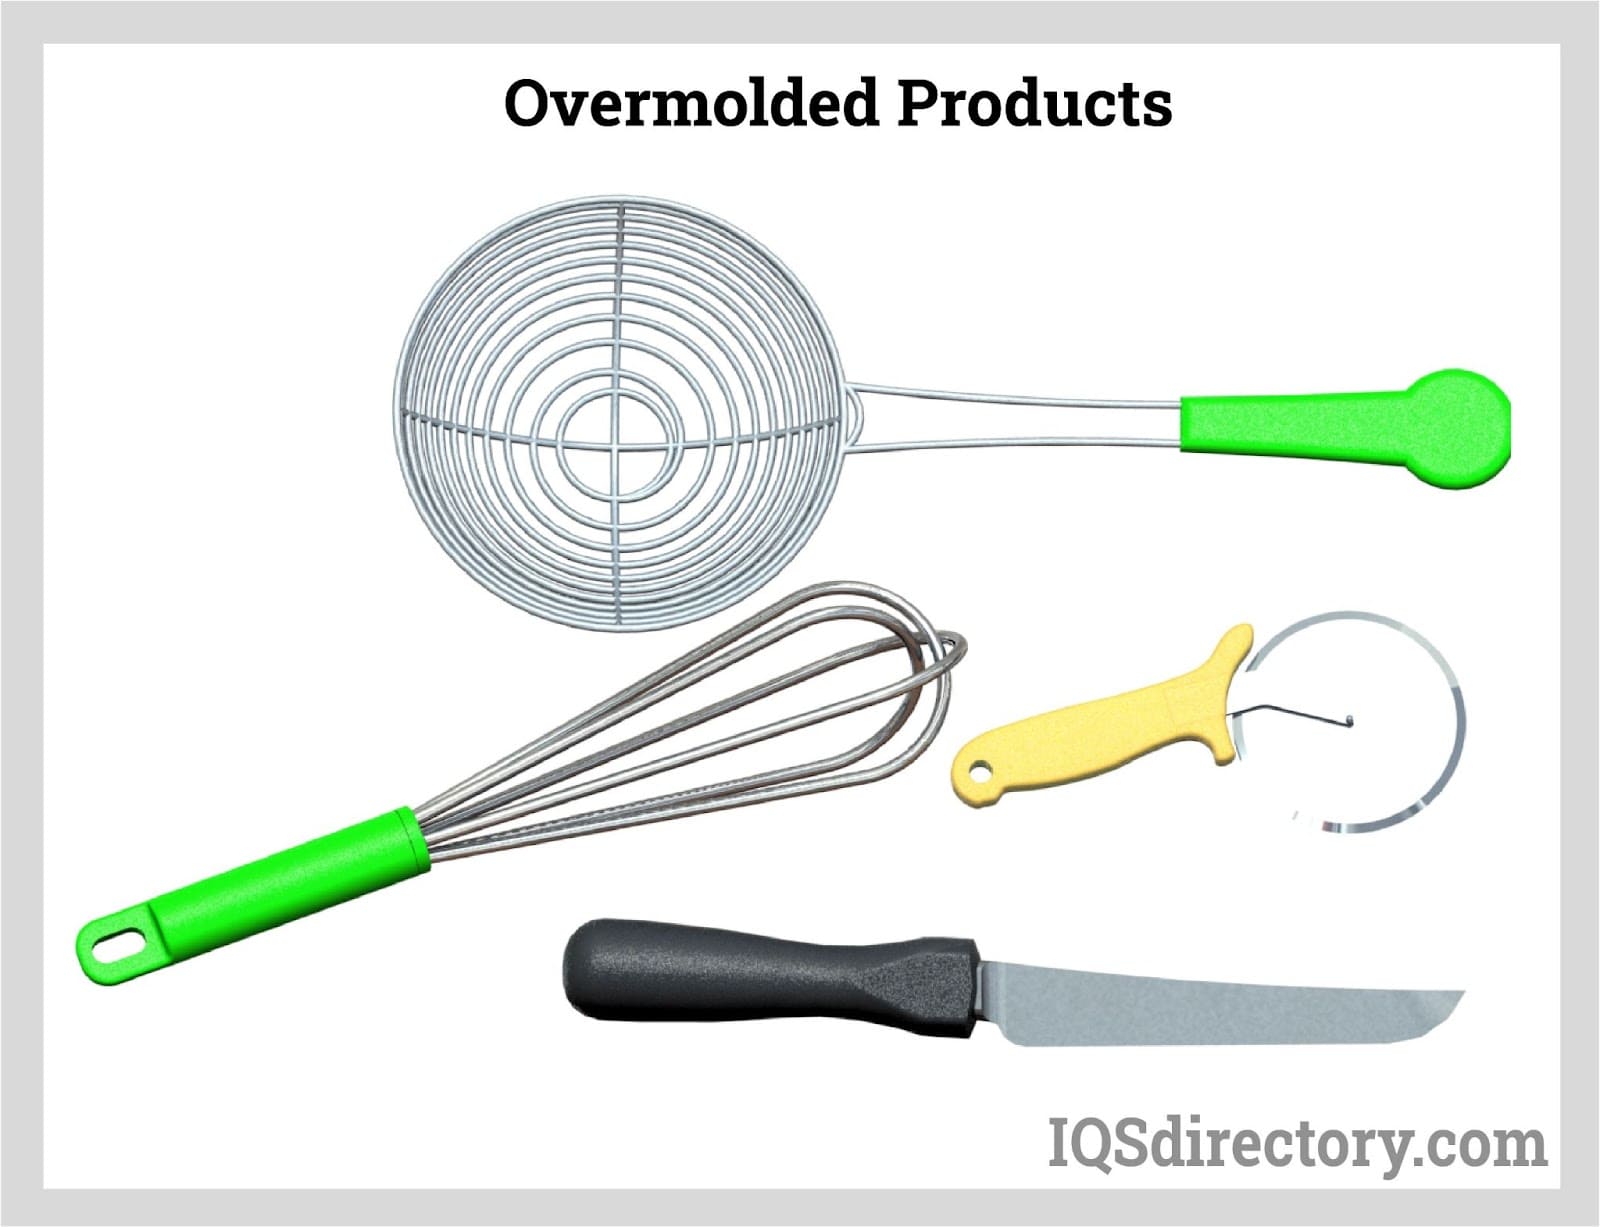 Overmolded Products